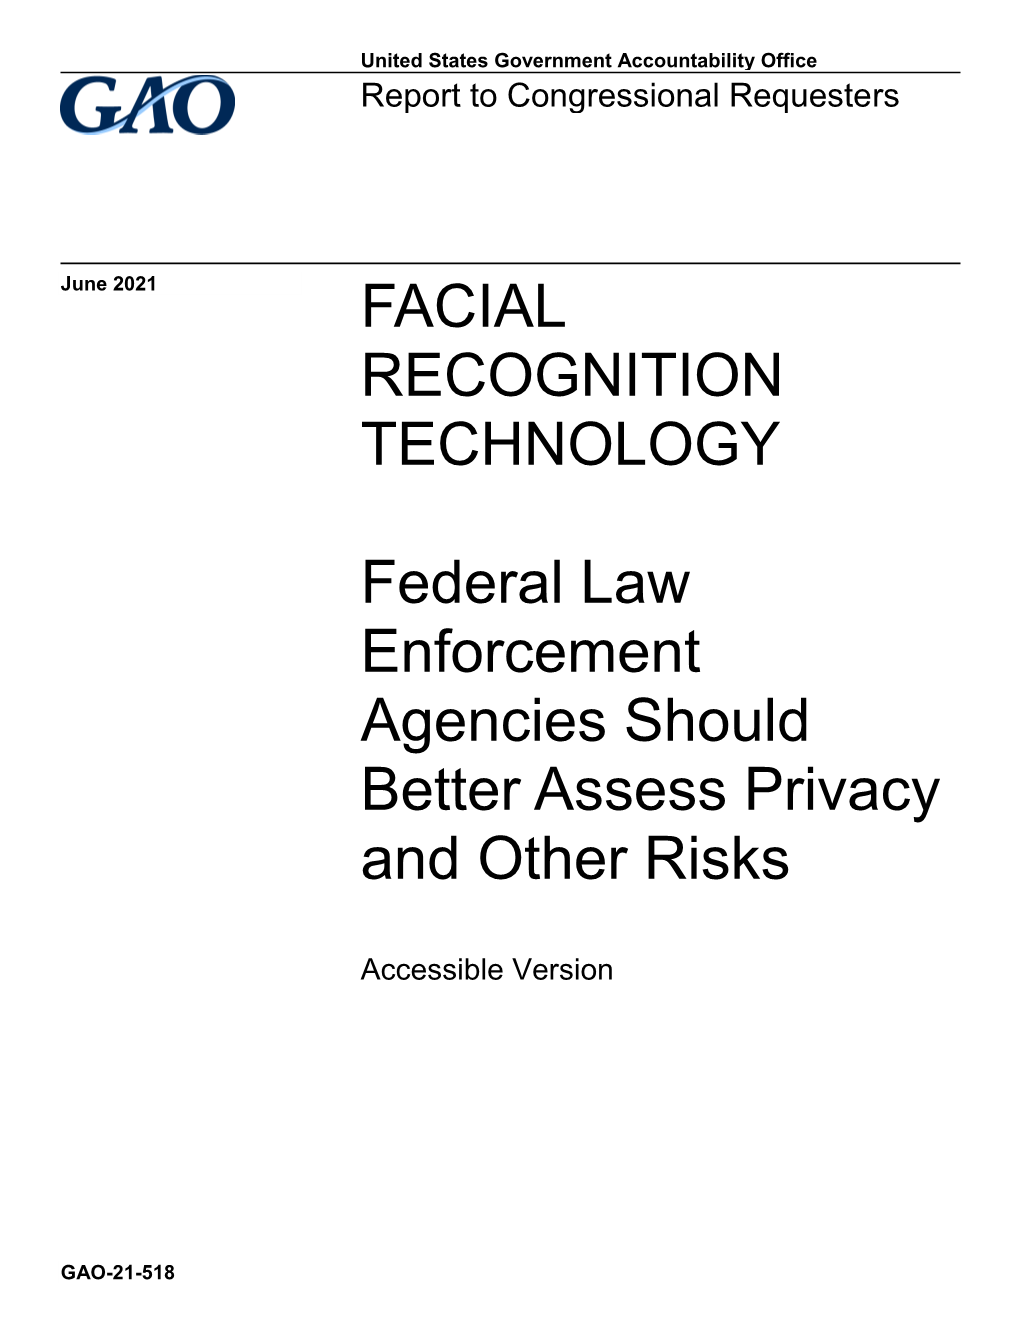 Facial Recognition Technology: Federal Law Enforcement Agencies Should Better Assess Privacy and Other Risks, GAO-21-243SU (Washington, D.C.: April 28, 2021)